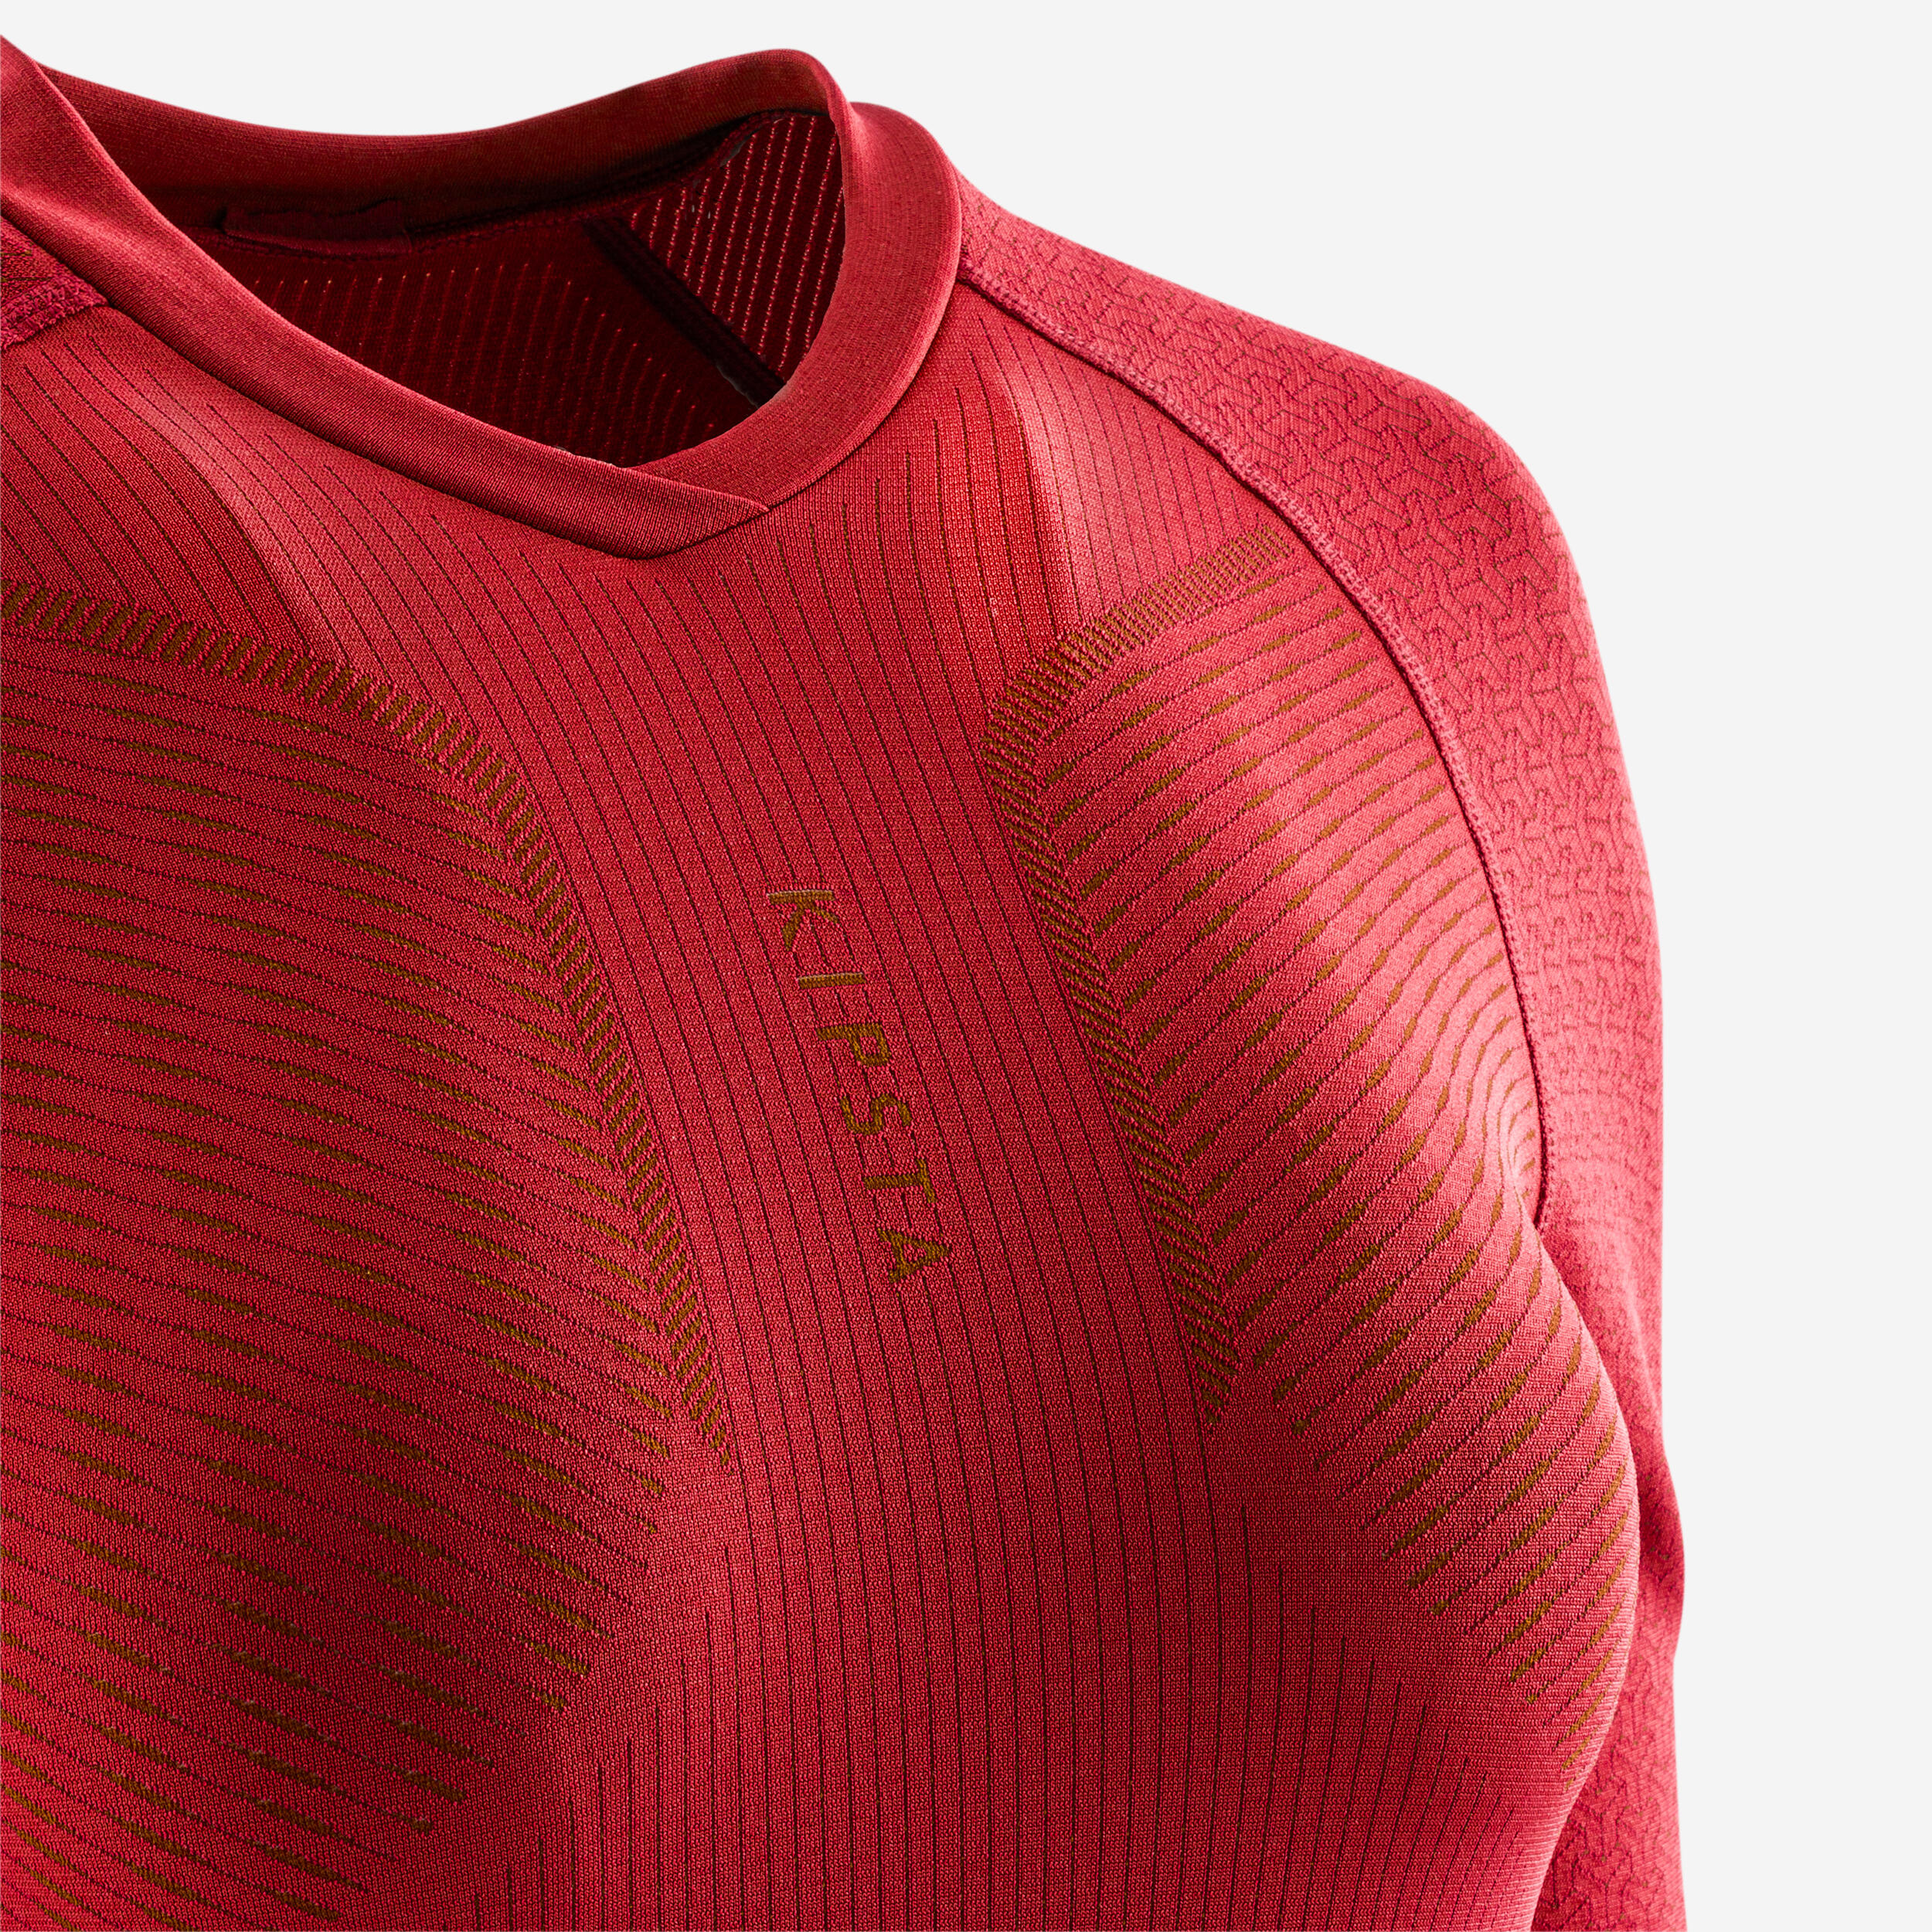 Adult Long-Sleeved Thermal Base Layer Top Keepdry 500 - Red 12/15